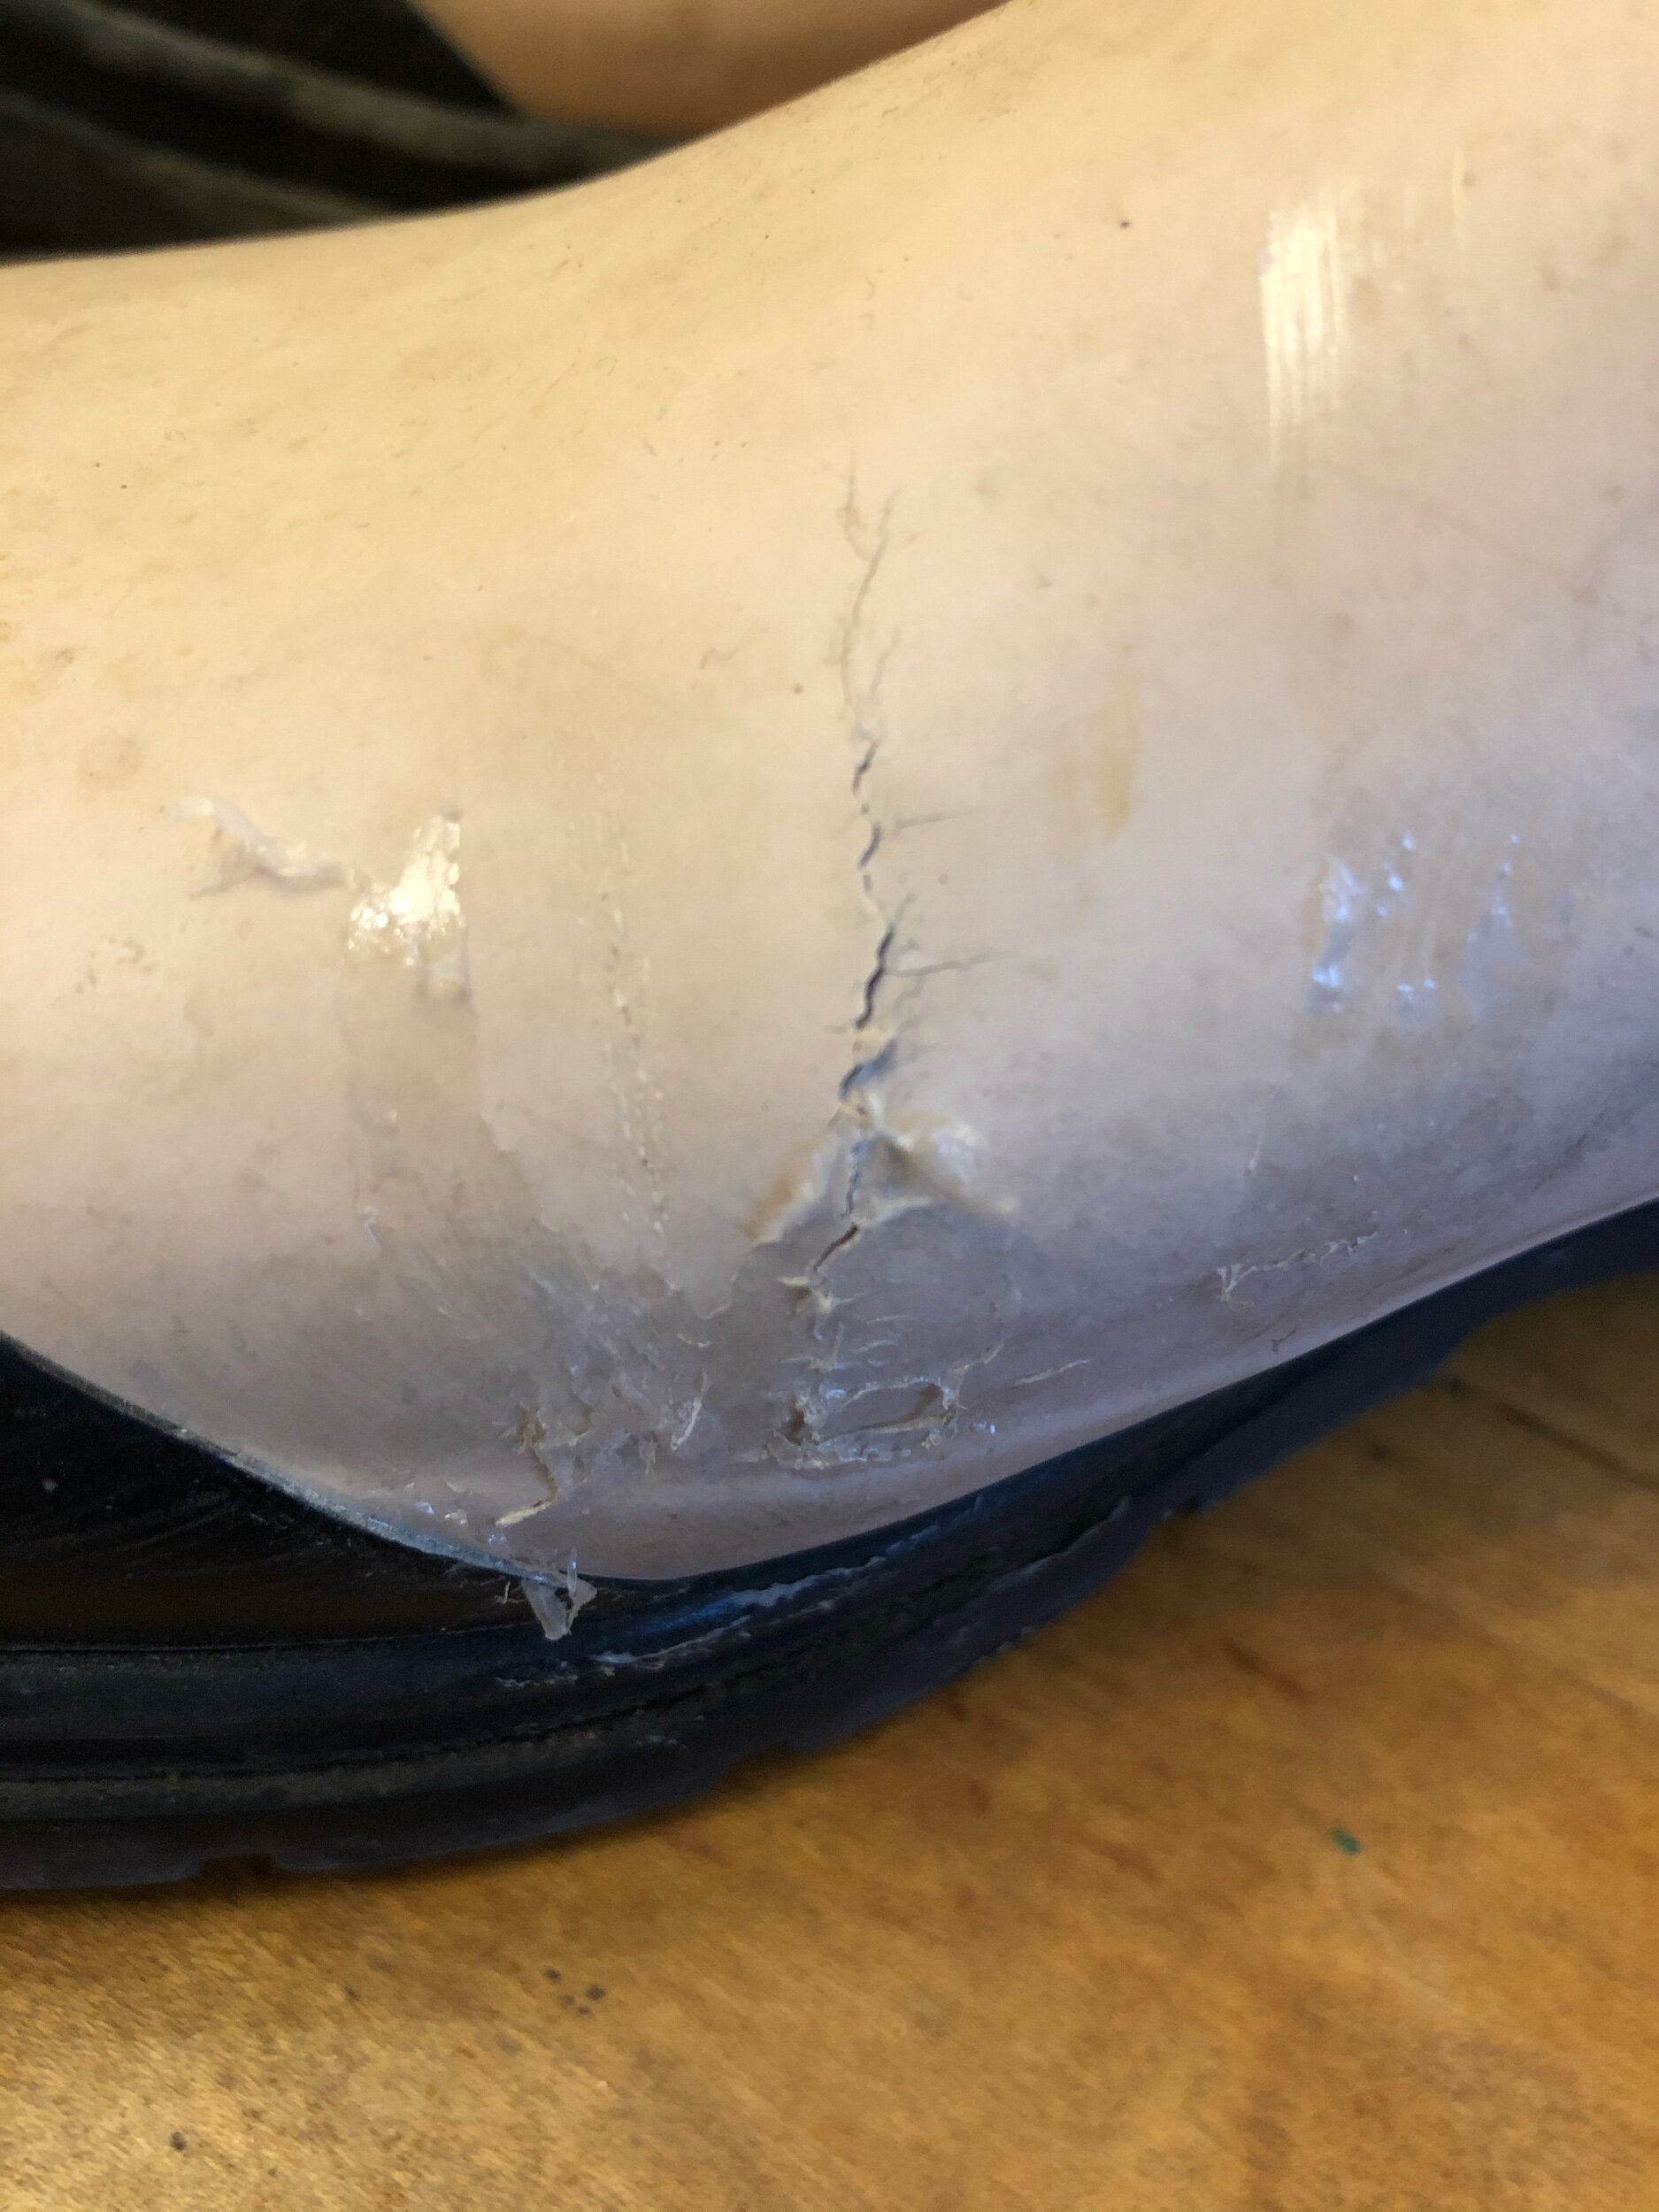 cracked rubber boots in need of a mend